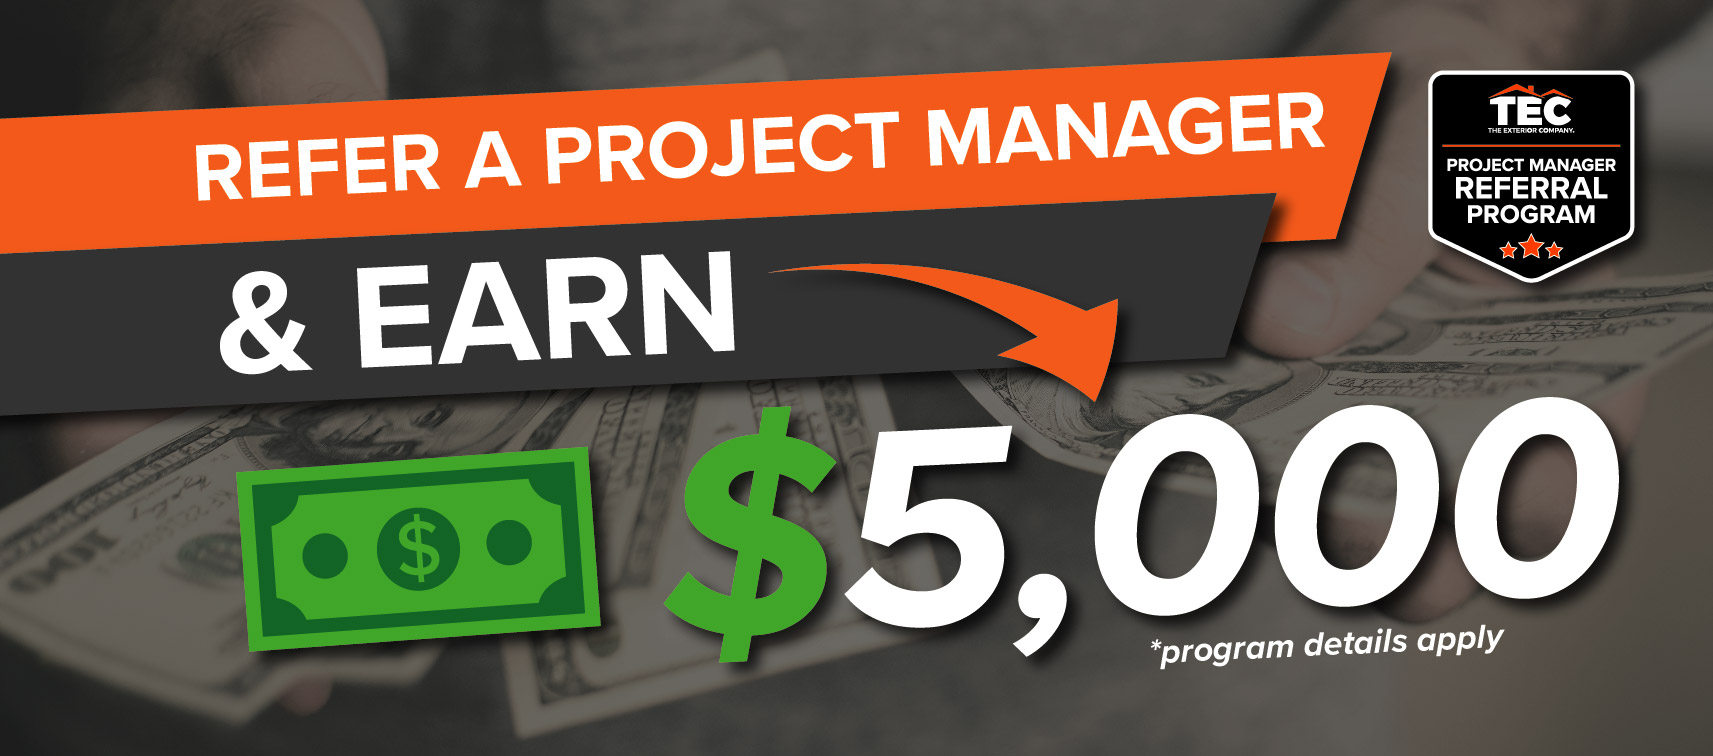 TEC project manager referral program work 5,000